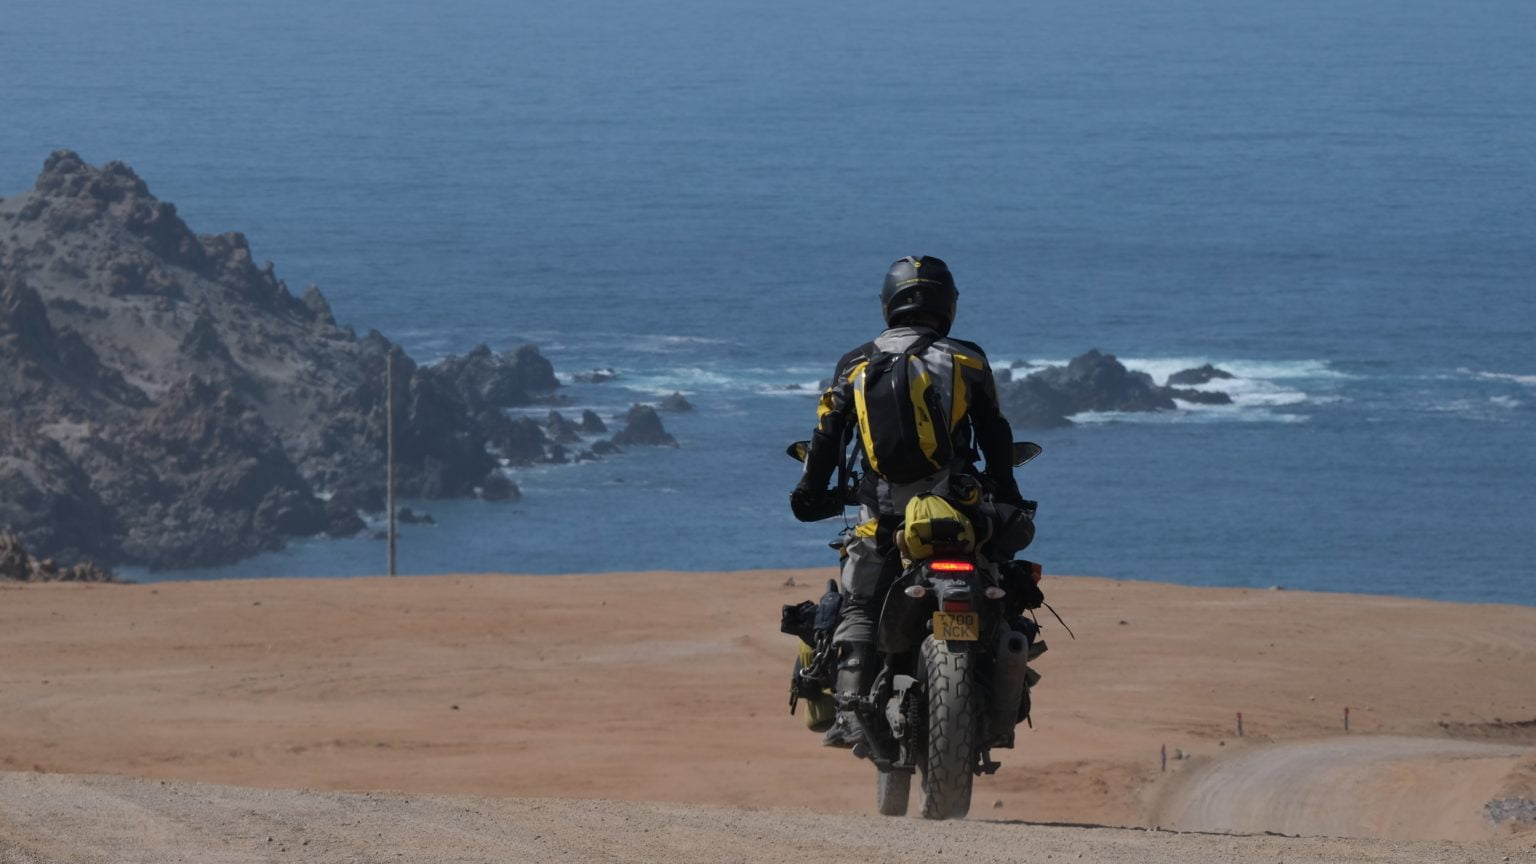 Nick Sanders, adventure motorcyclist, about to circumnavigate the world